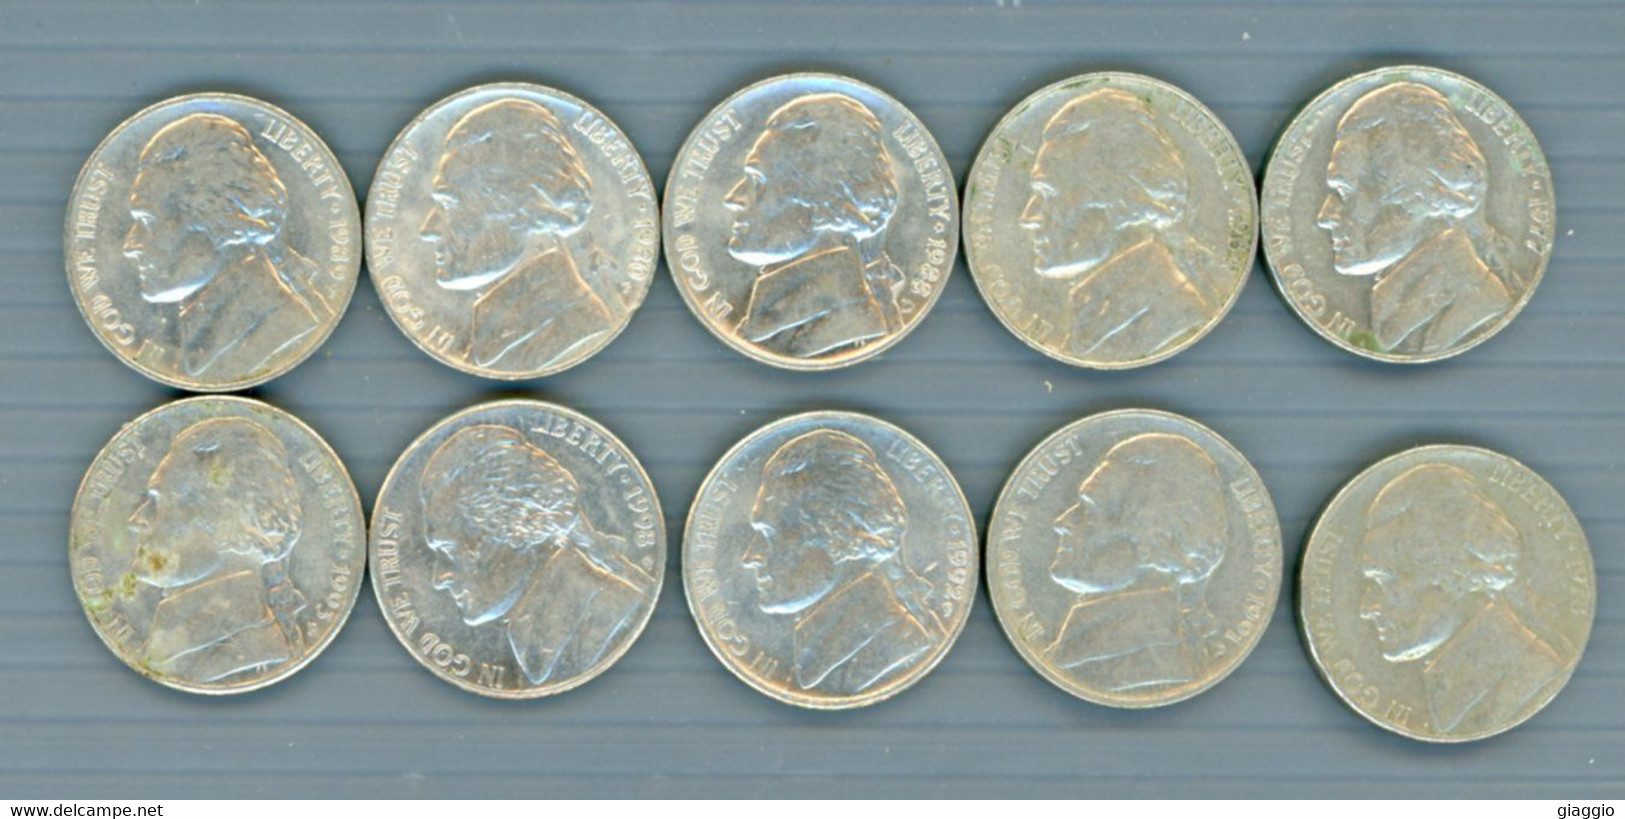 °°° Usa N.427 - Lotto Di 10 Five Cents Varie Date Circolate °°° - Mixed Lots